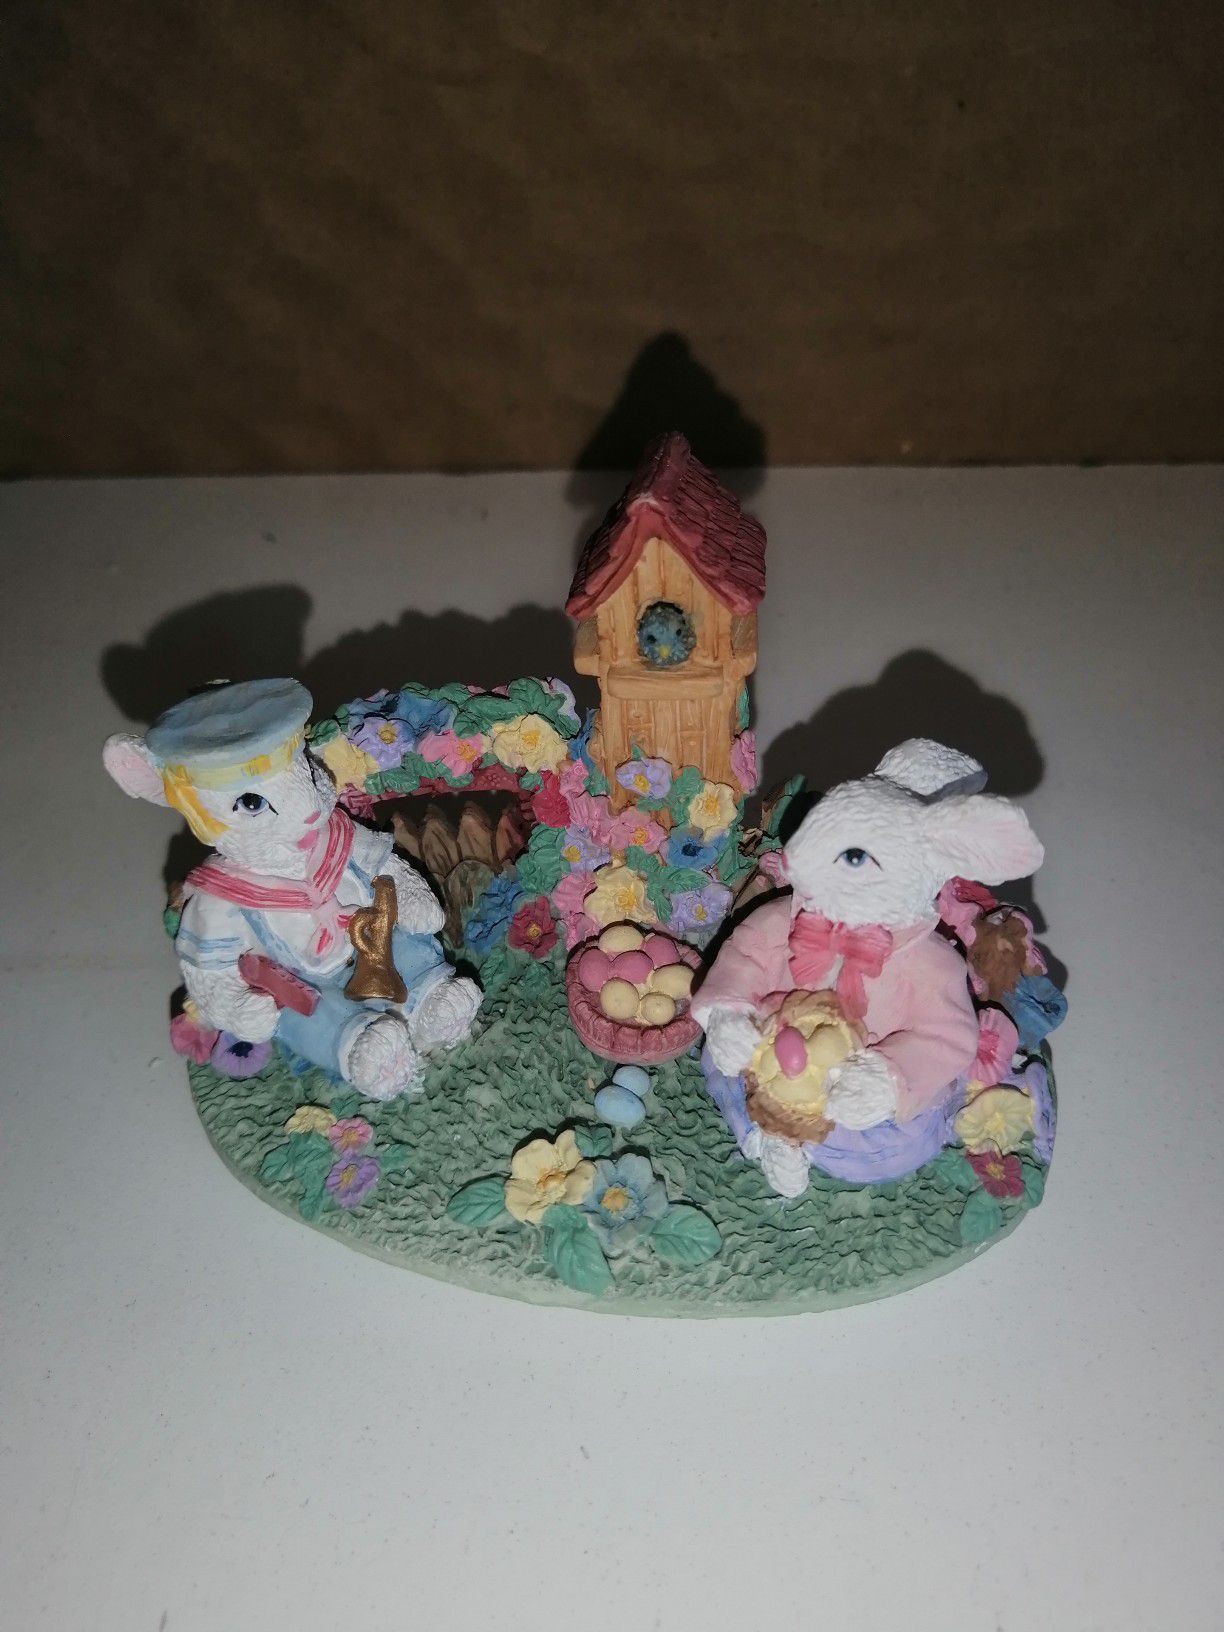 2 Bunnies with Easter Egg Basket and a Tower W4" x H3" x D3"